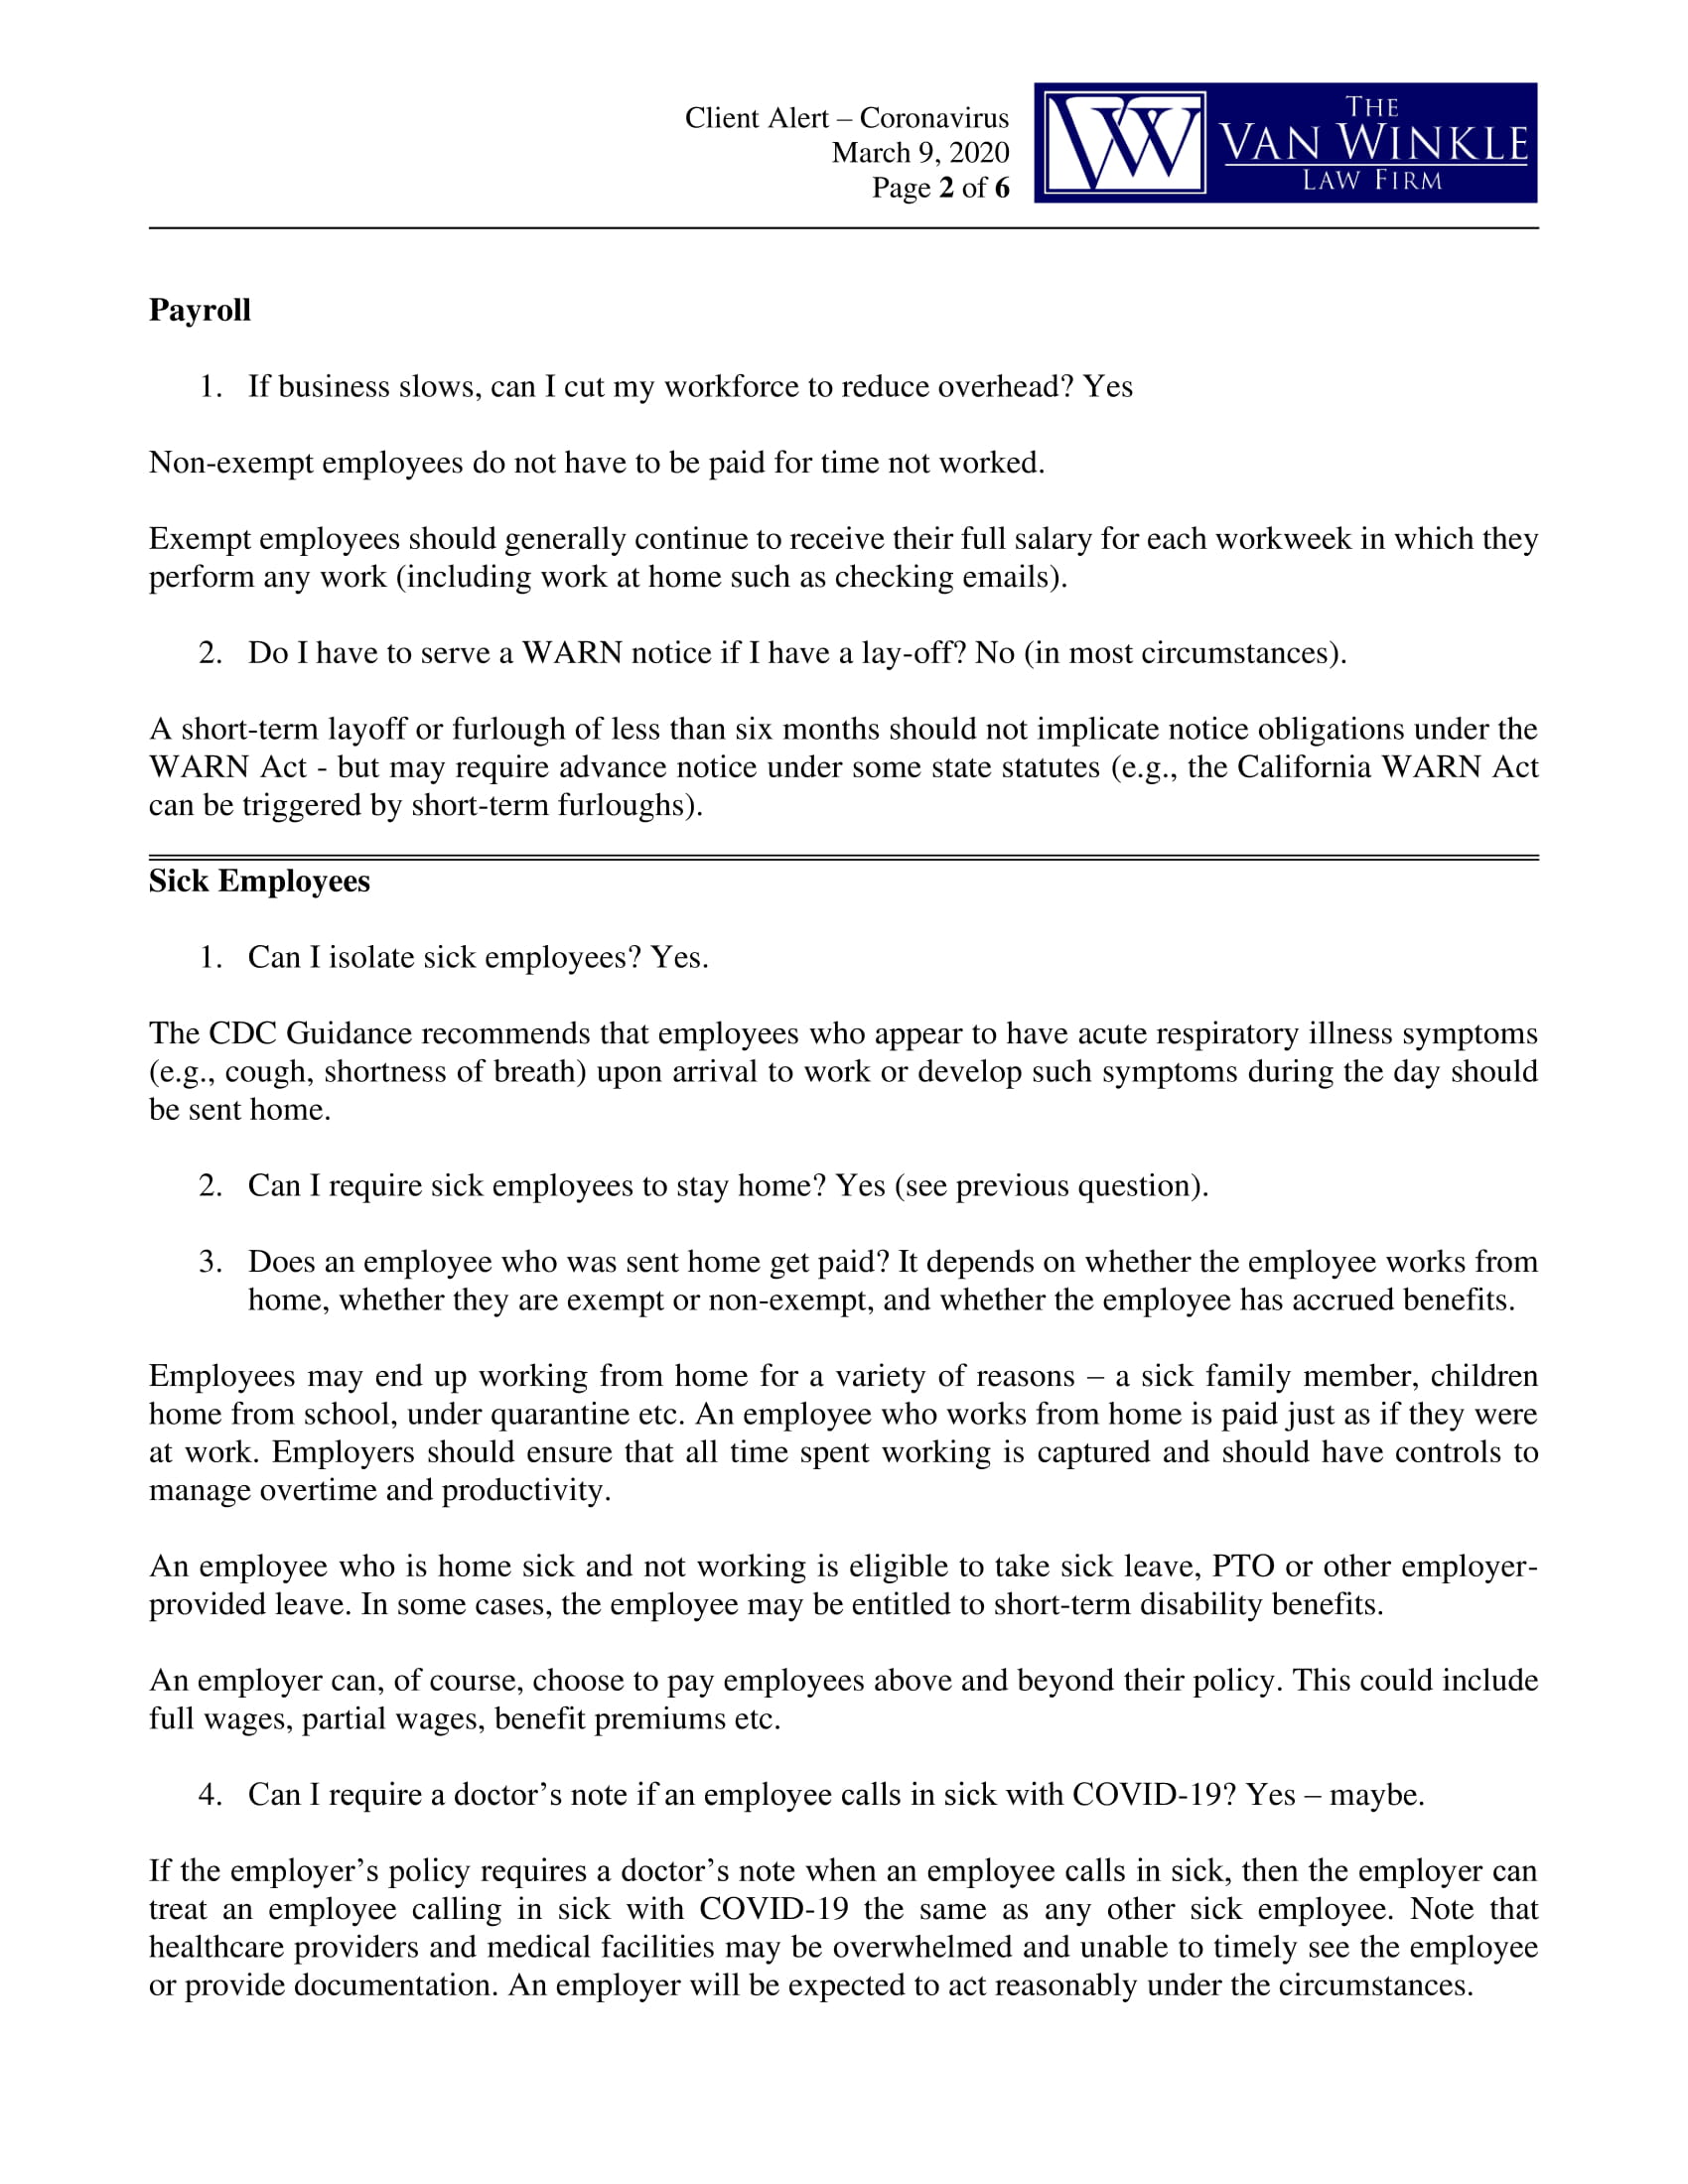 Employment Law Page 2